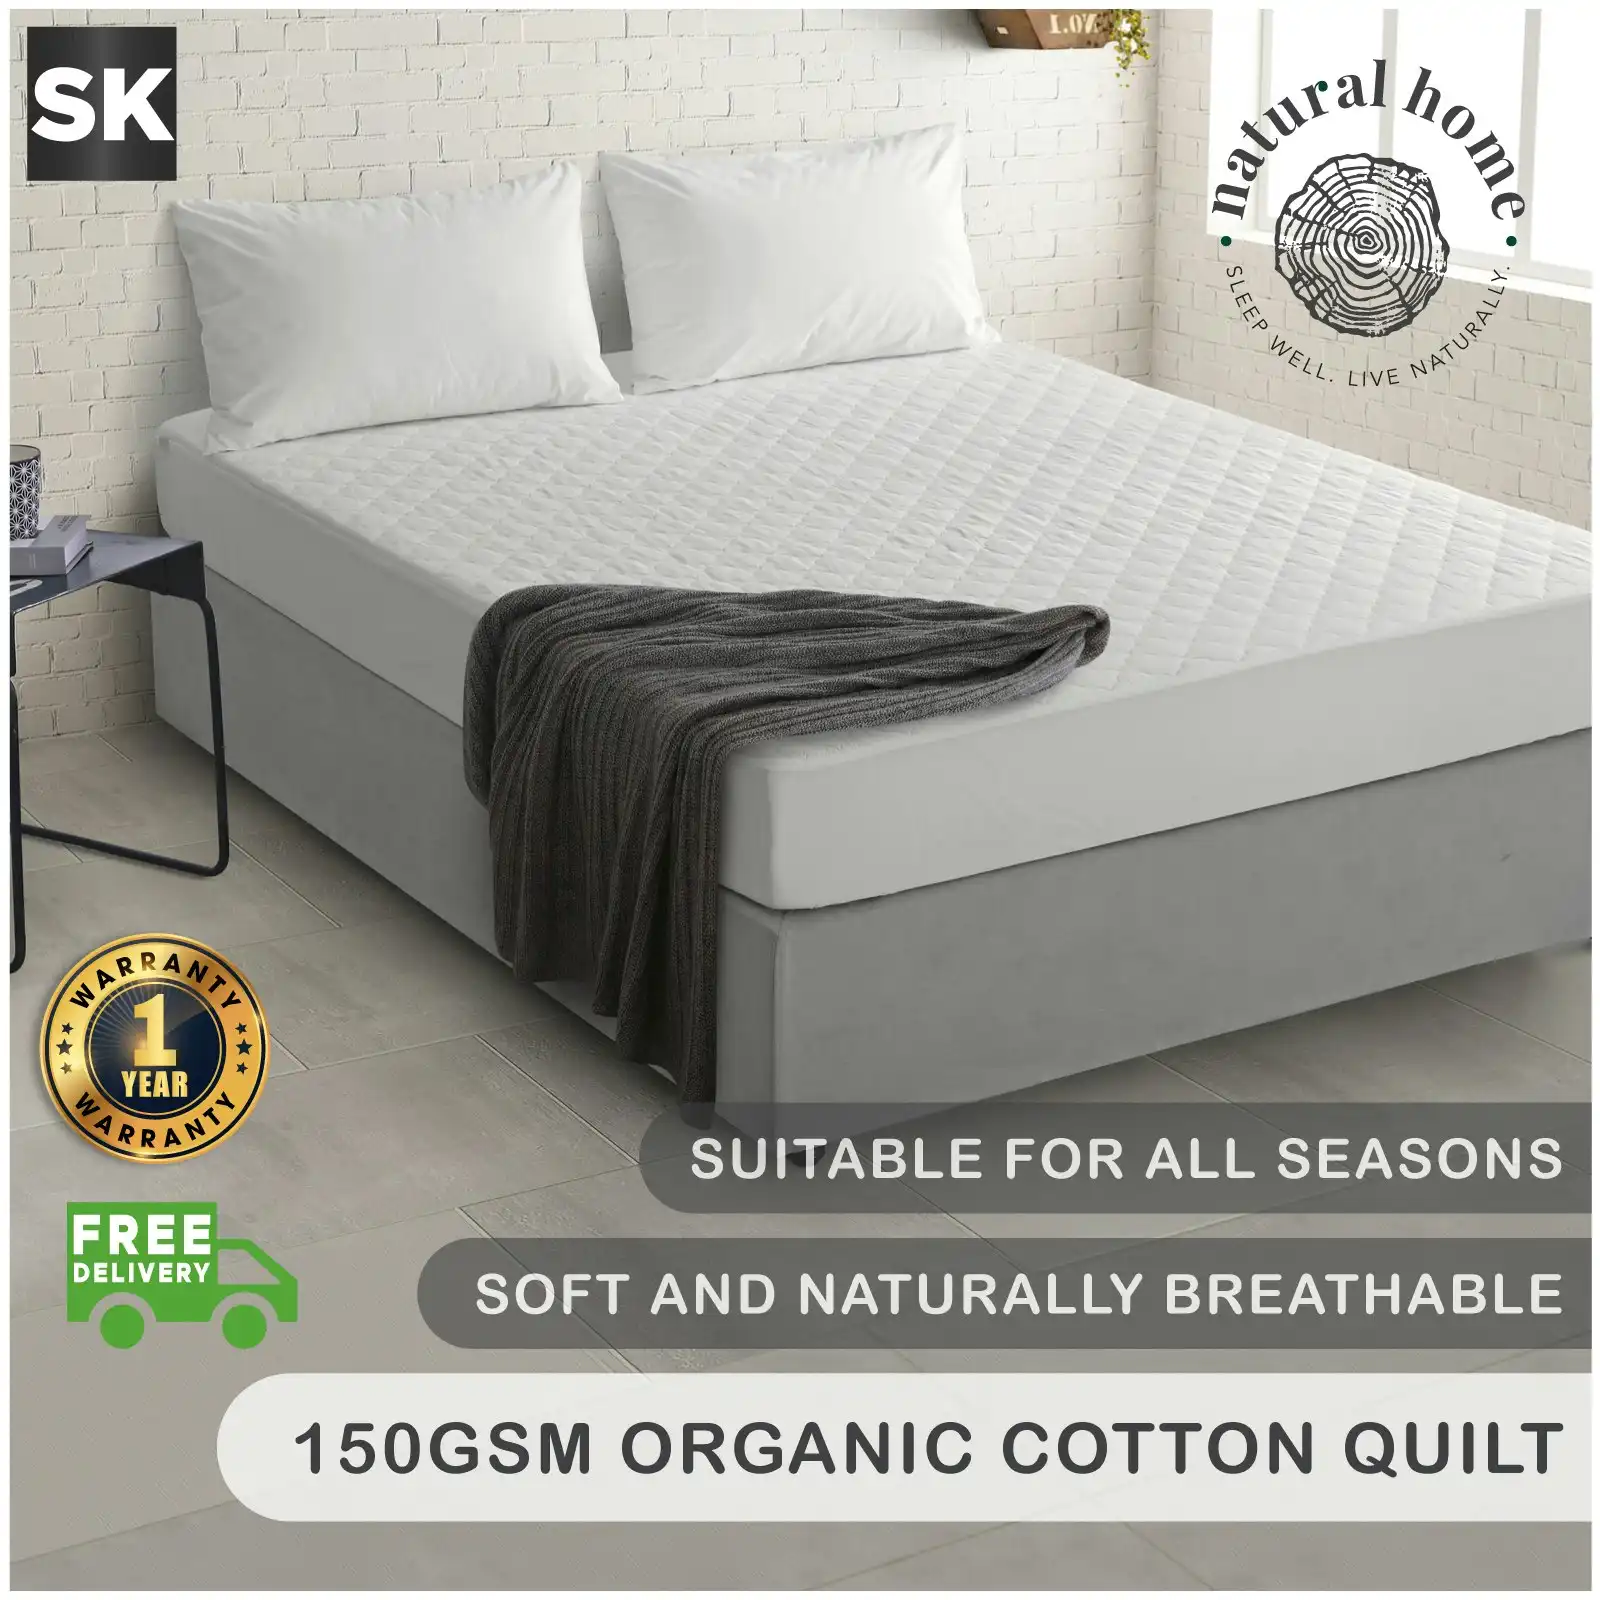 Natural Home Organic Cotton Quilted Mattress Protector White Super King Bed